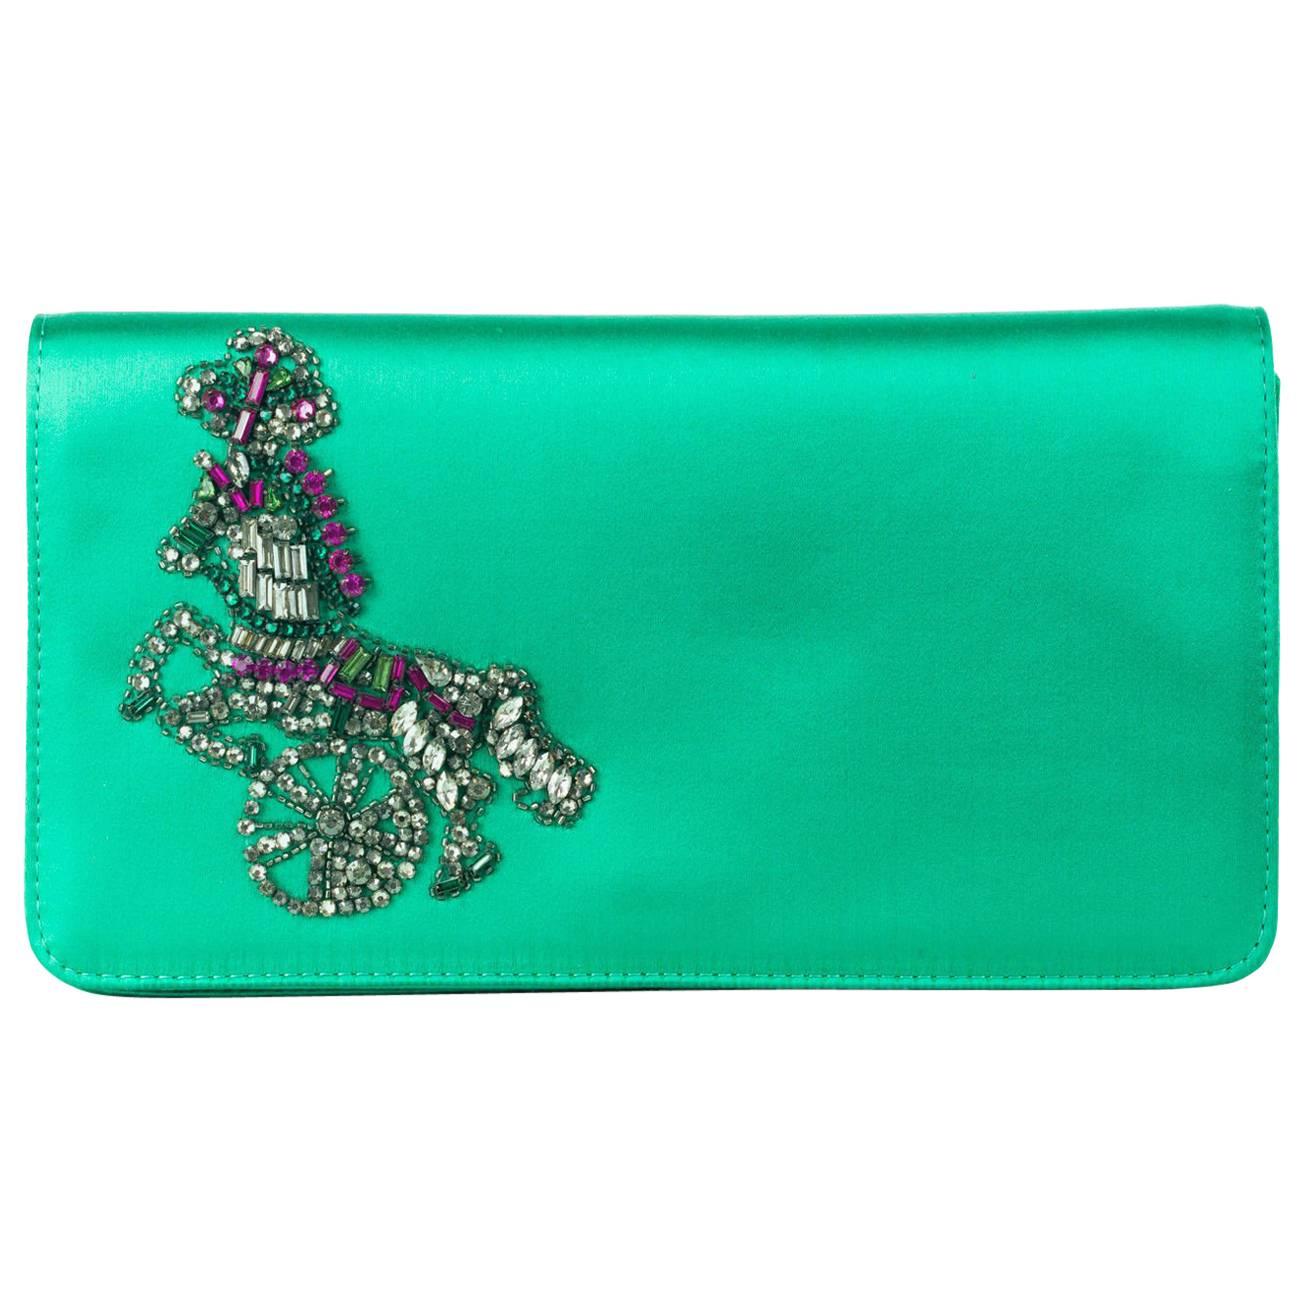 Roberto Cavalli Solid Green Satin Embellished Embroidered Clutch For Sale